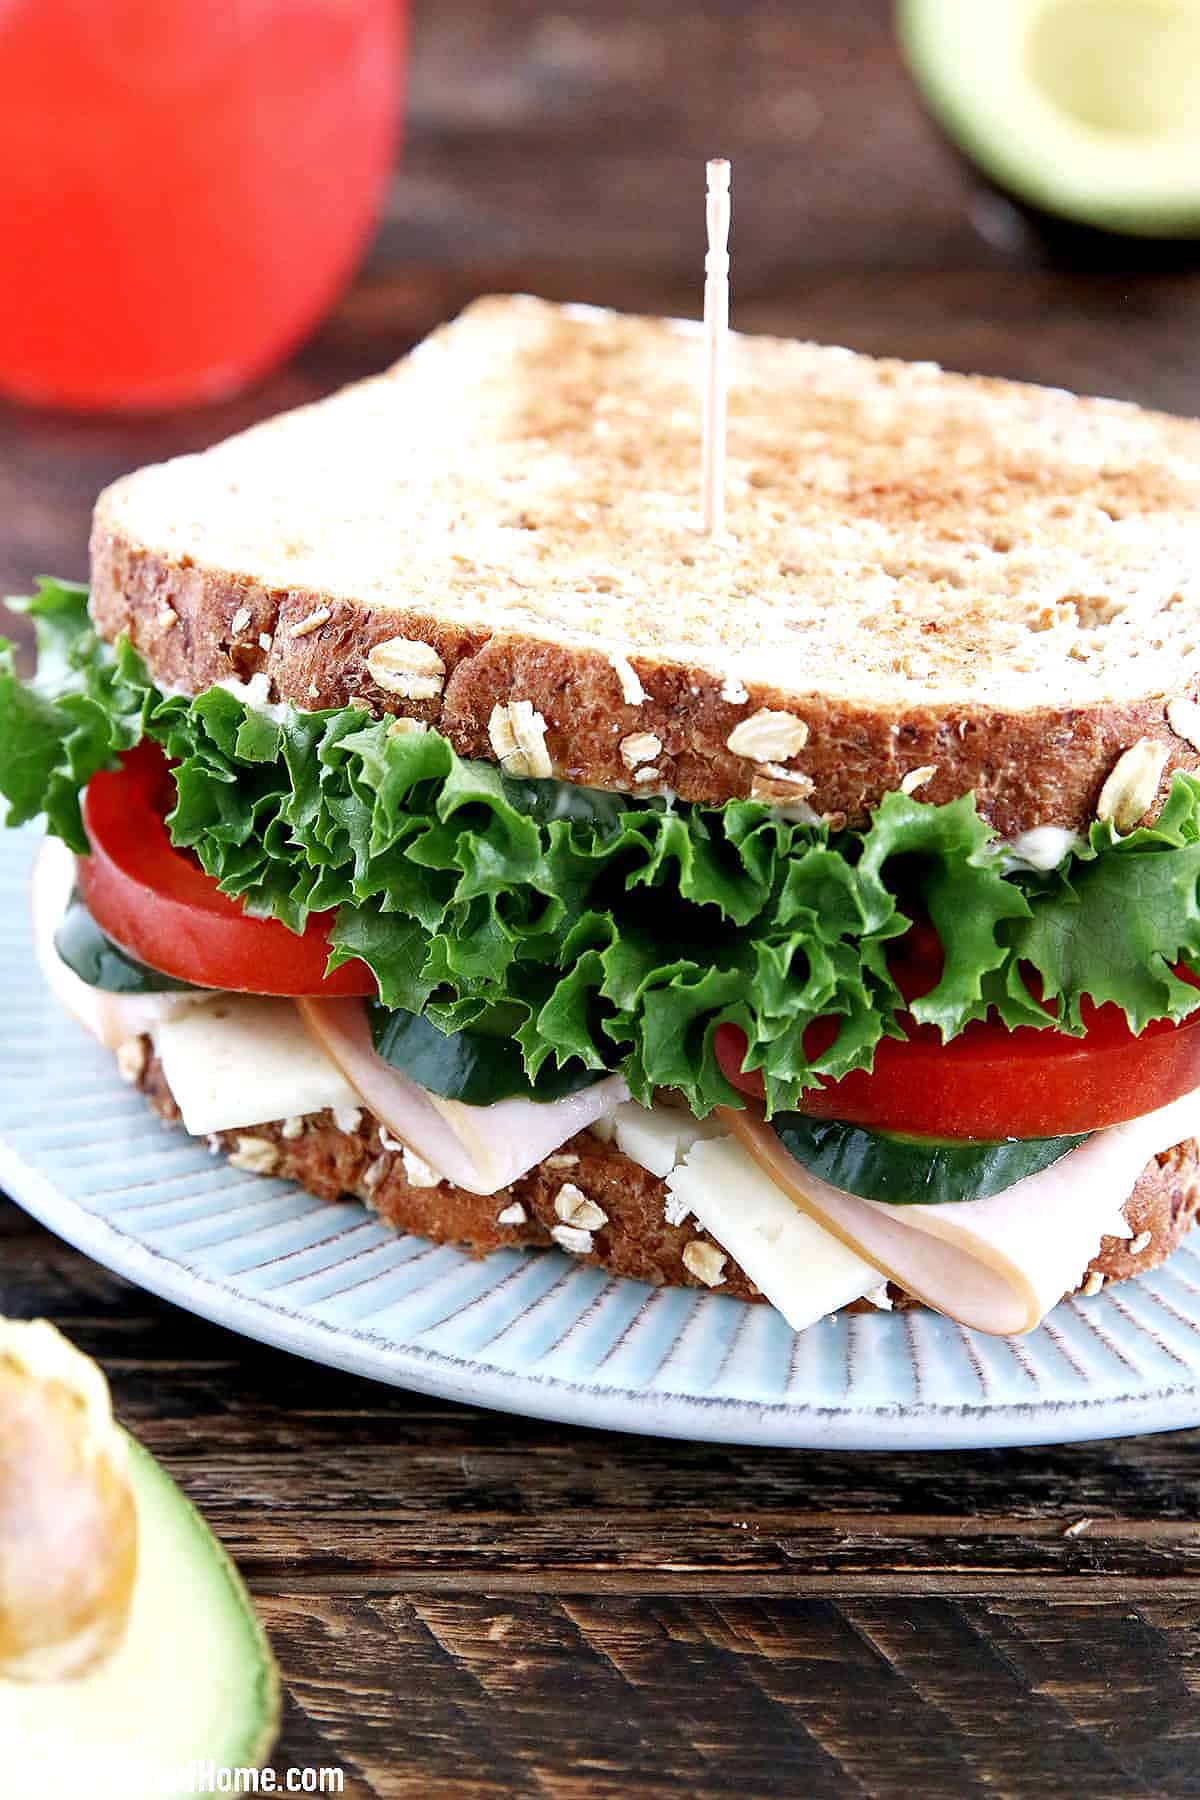 A turkey sandwich is the perfect and classic combination of savory, protein-rich turkey and vegetables, sandwiched between two slices of bread.